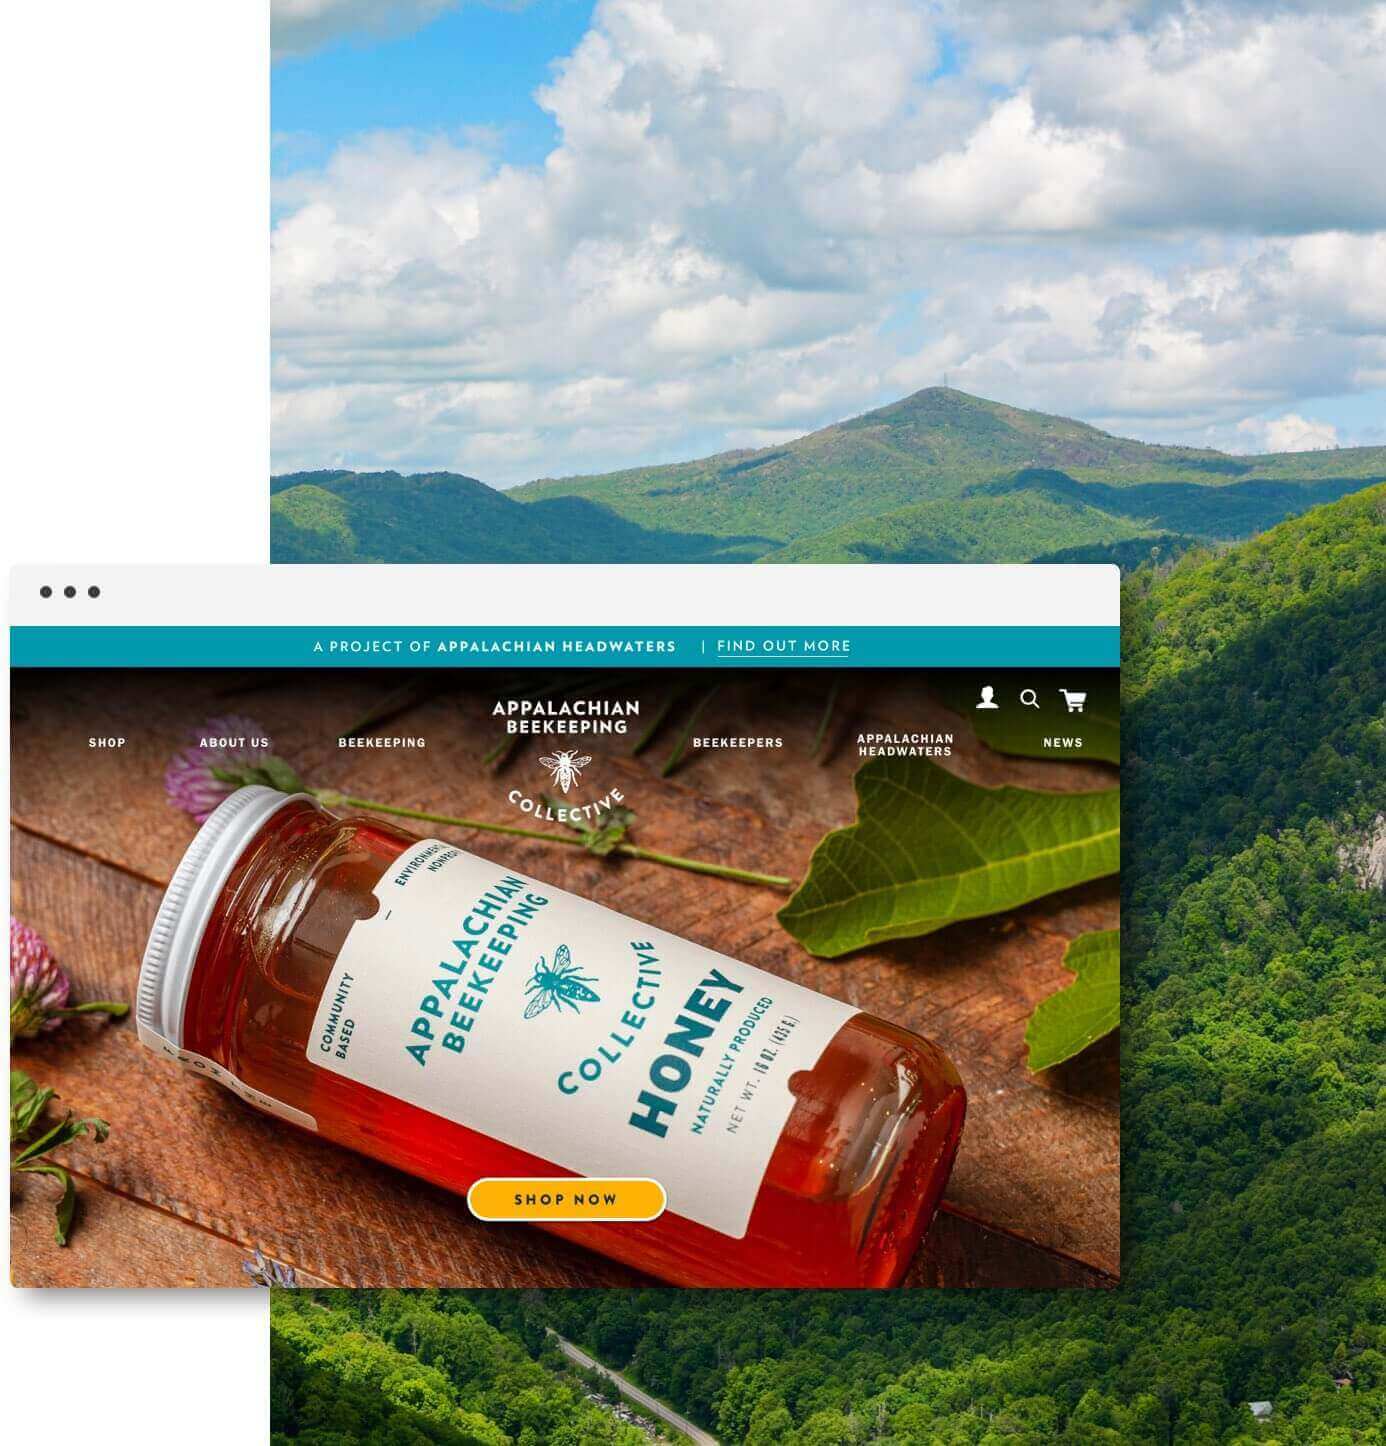 Appalachian beekeeping collective jar on landscape background